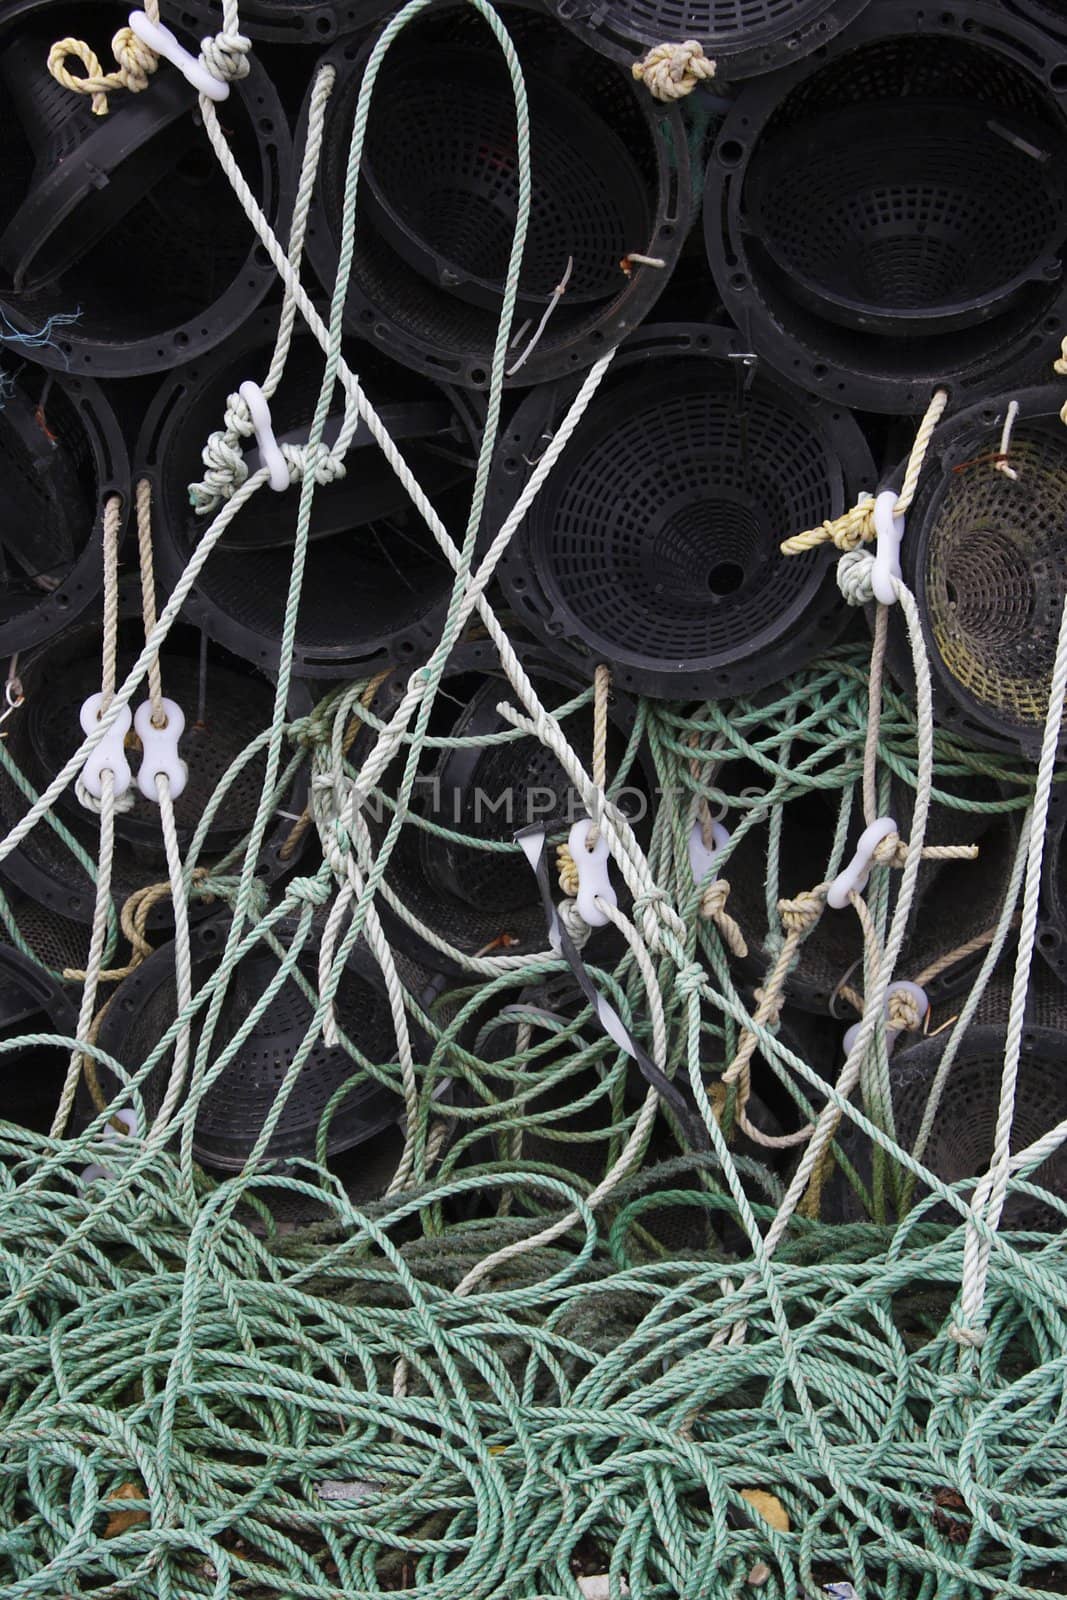 a tangled web of lobster pots and ropes